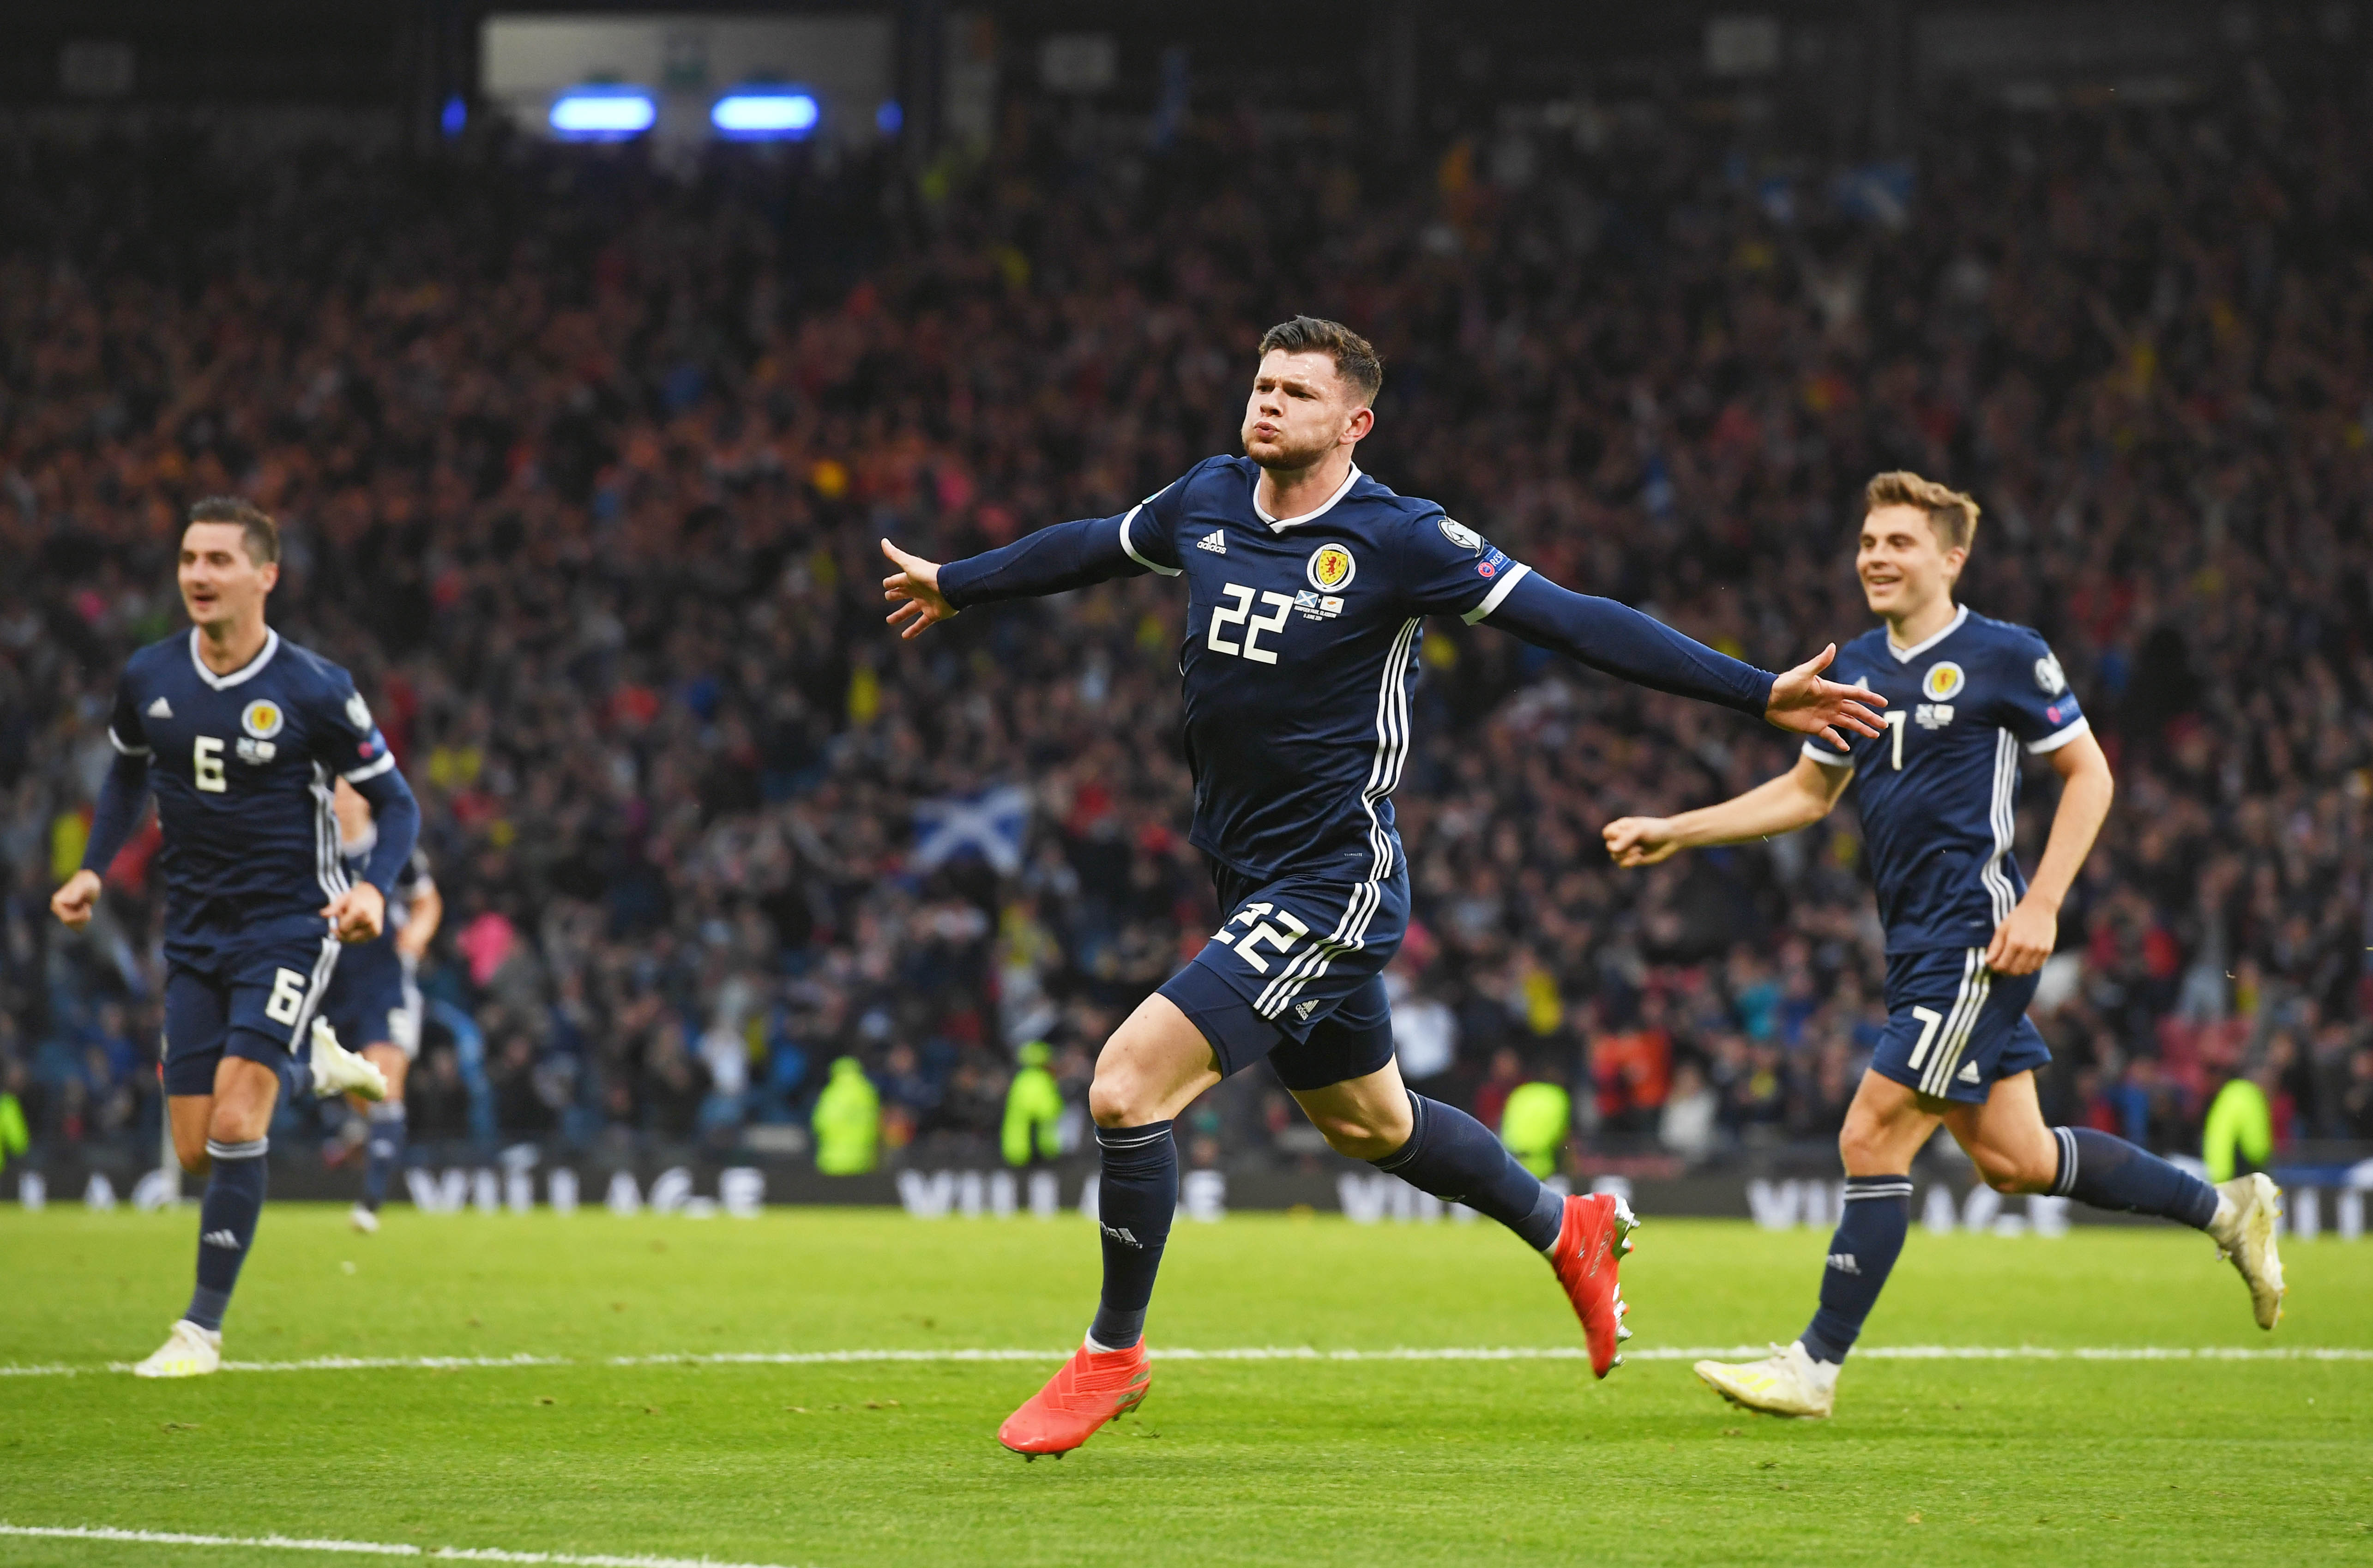 Scotland's Oliver Burke celebrates his late goal against Cyprus earlier this year.